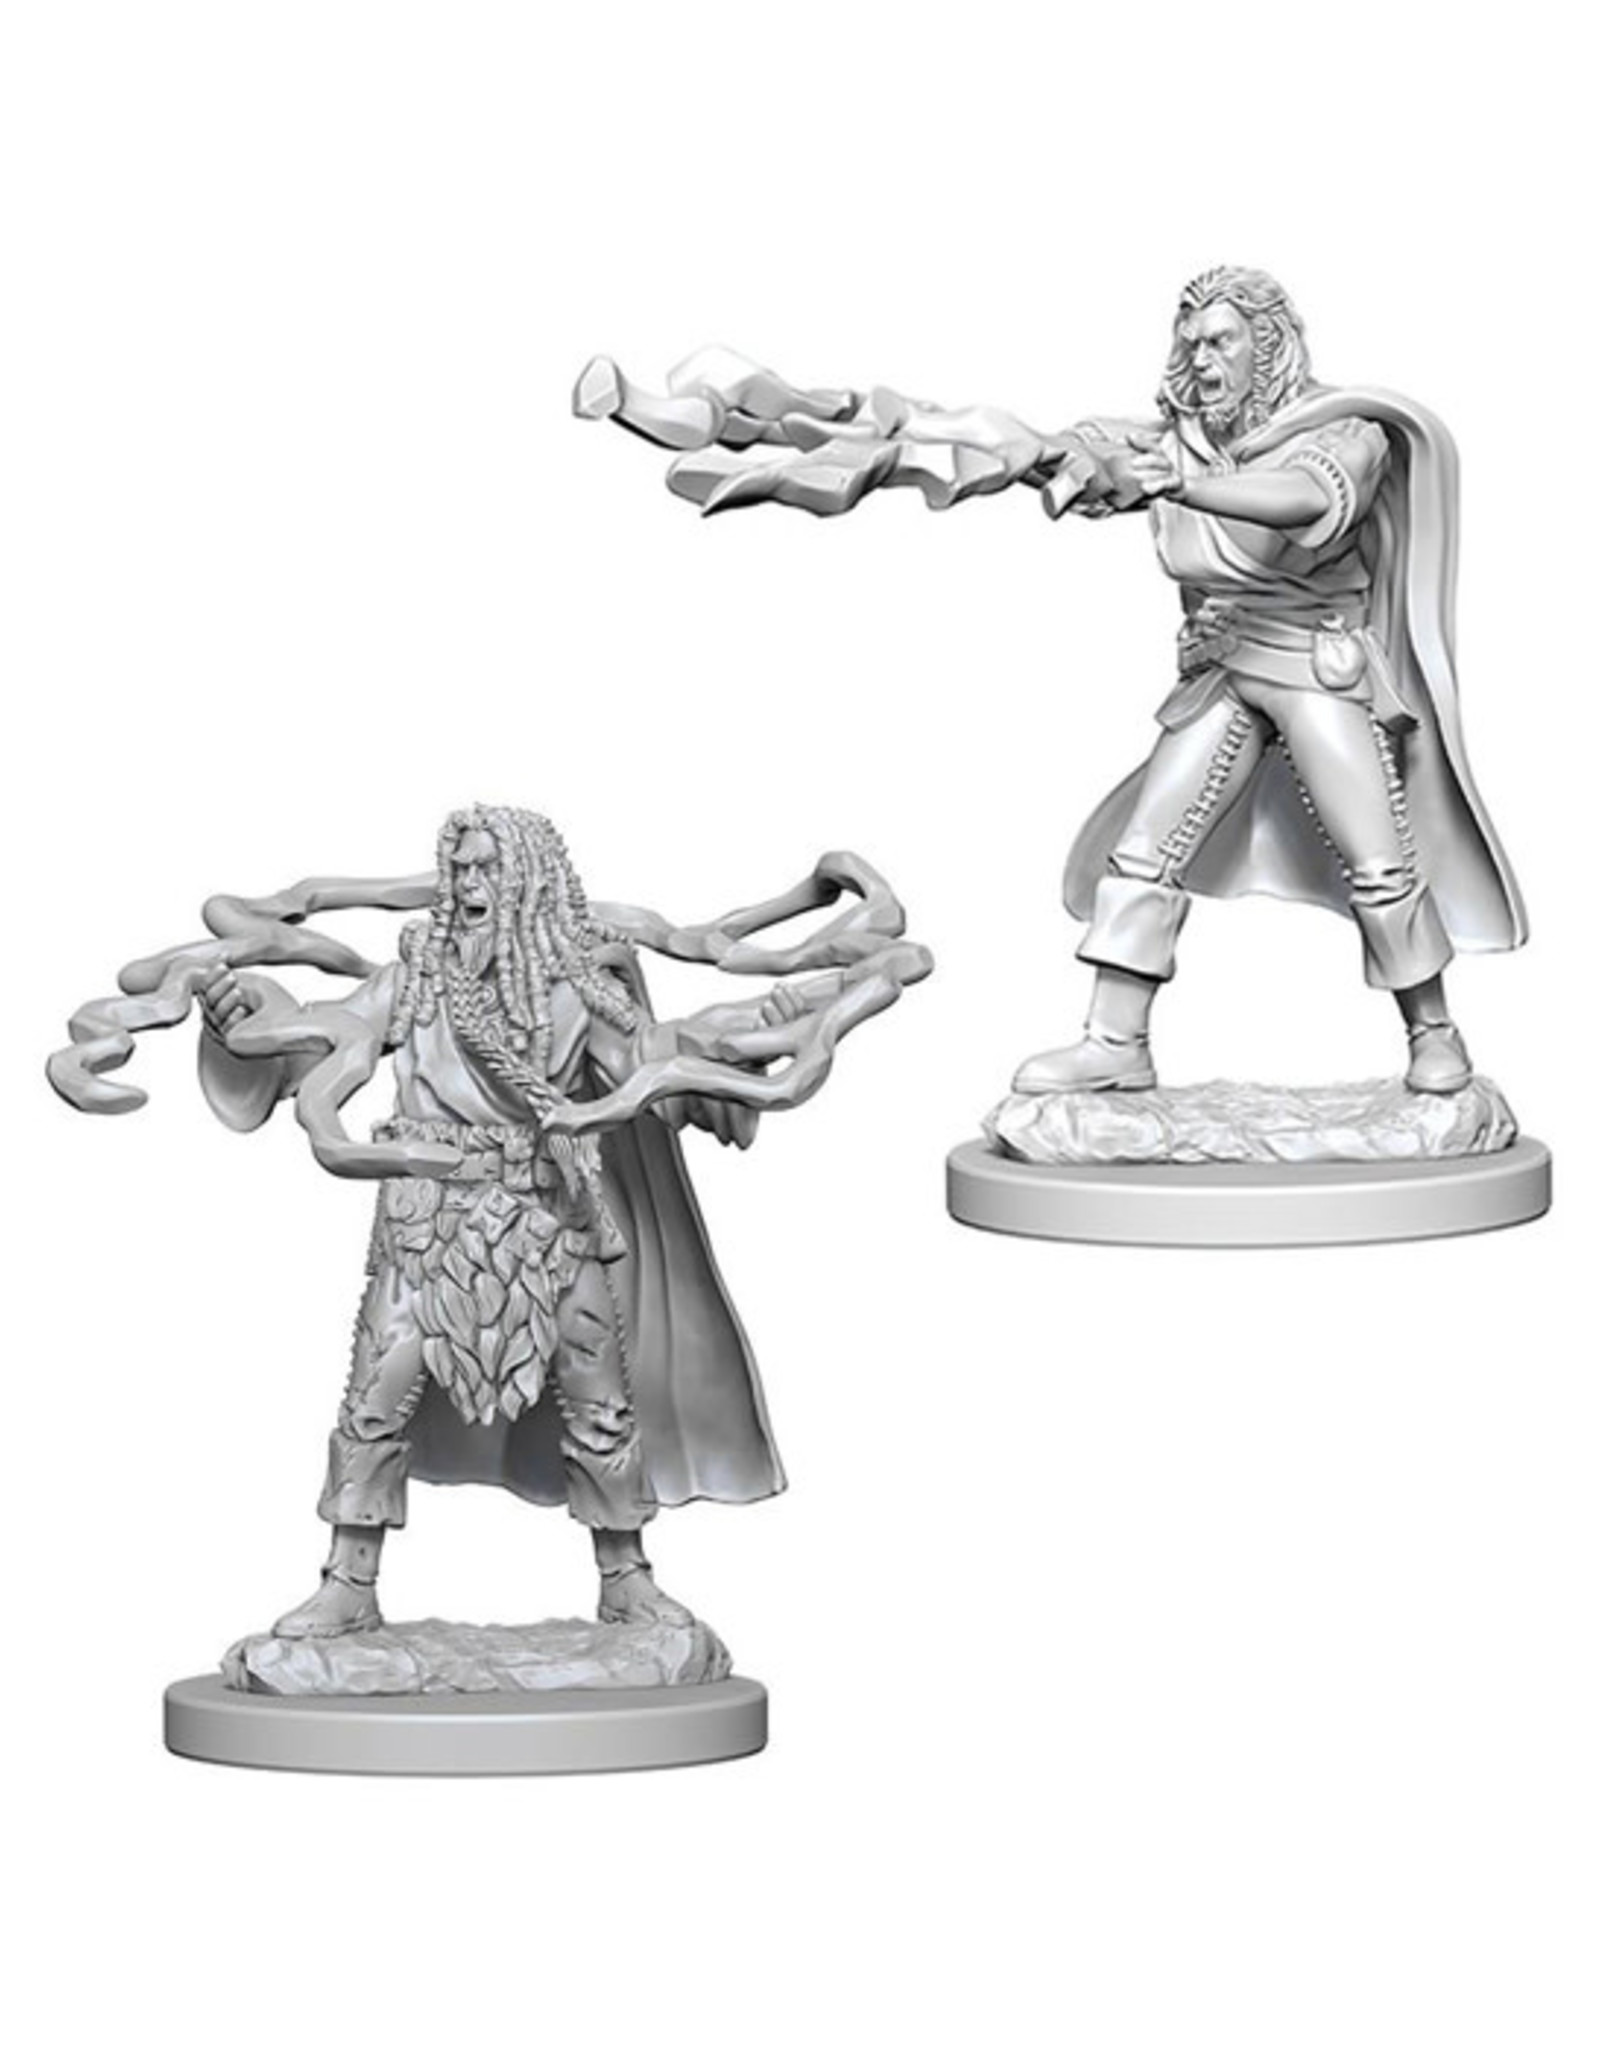 Dungeons & Dragons Dungeons & Dragons: Nolzur's - Human Male Sorcerer